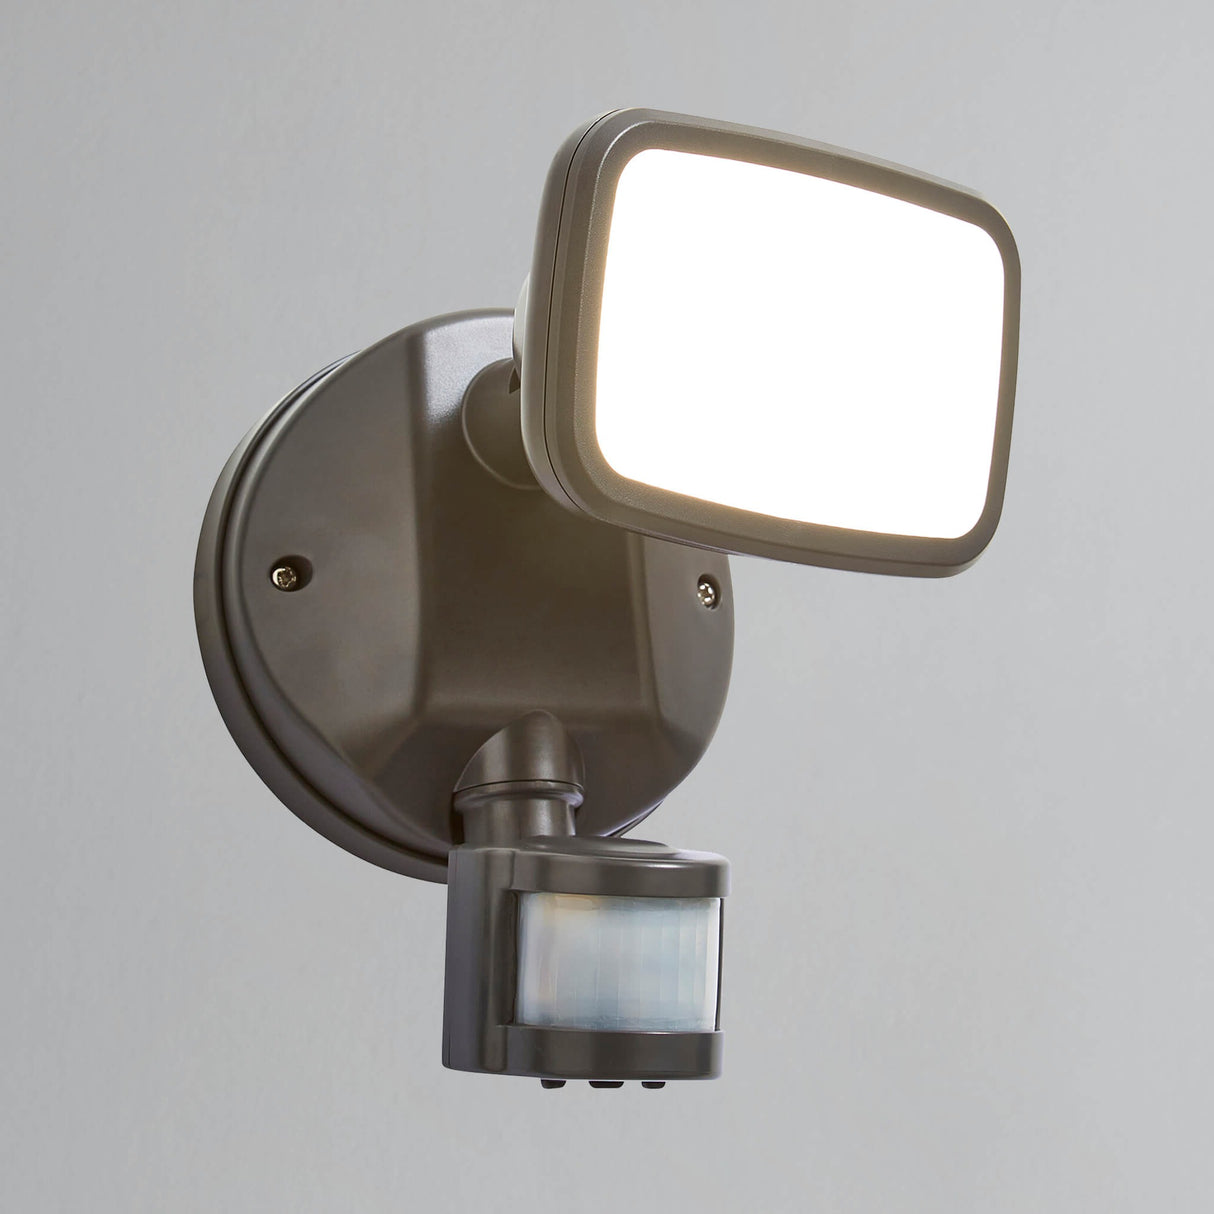 Solina Outdoor LED Security Flood Light